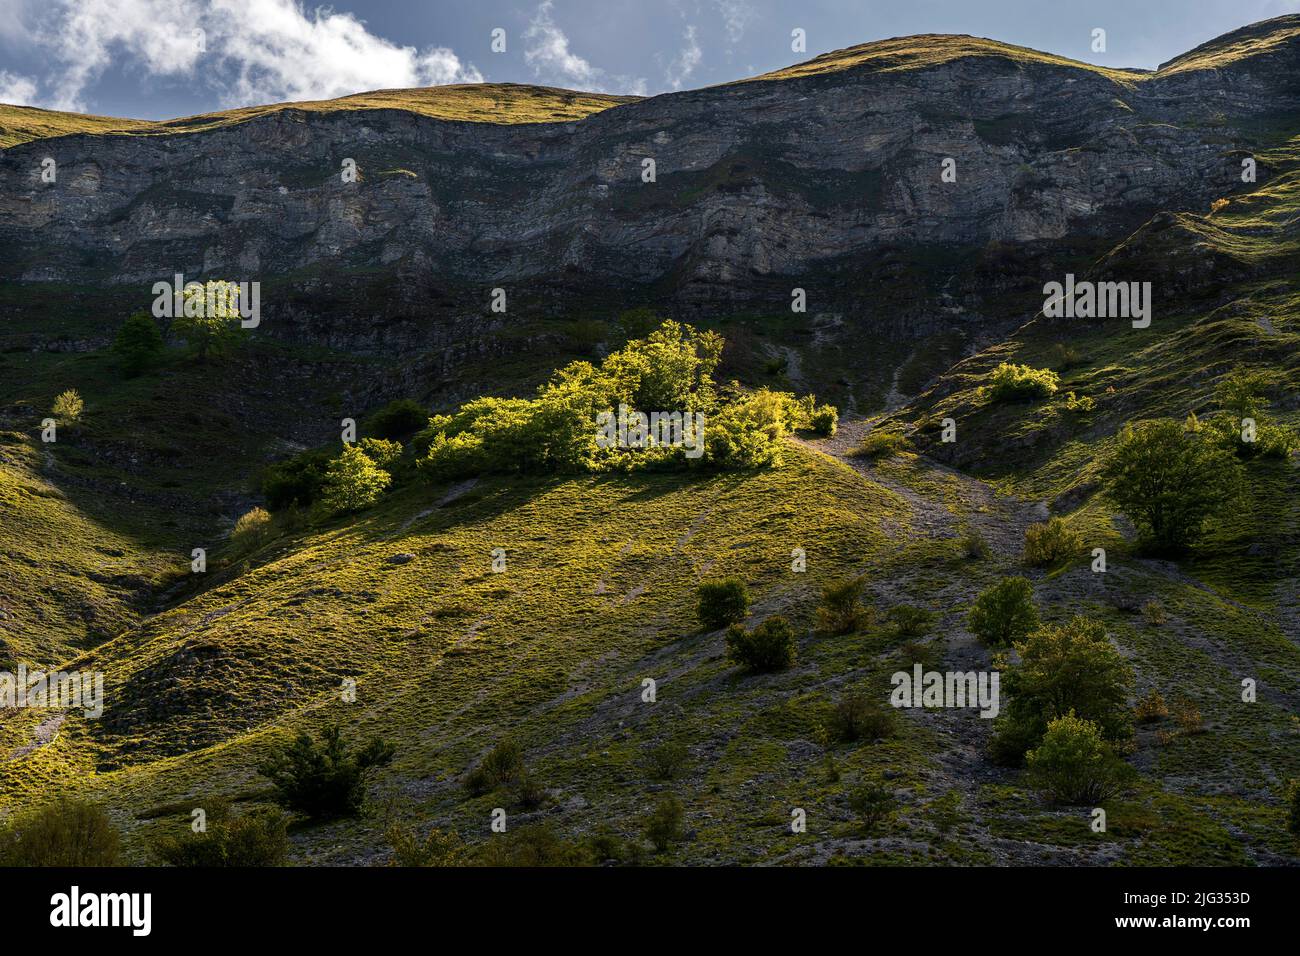 Monti Sibillini National Park, View  from the Paths of Val di Panico, Ussita, Marche, Italy, Europe Stock Photo